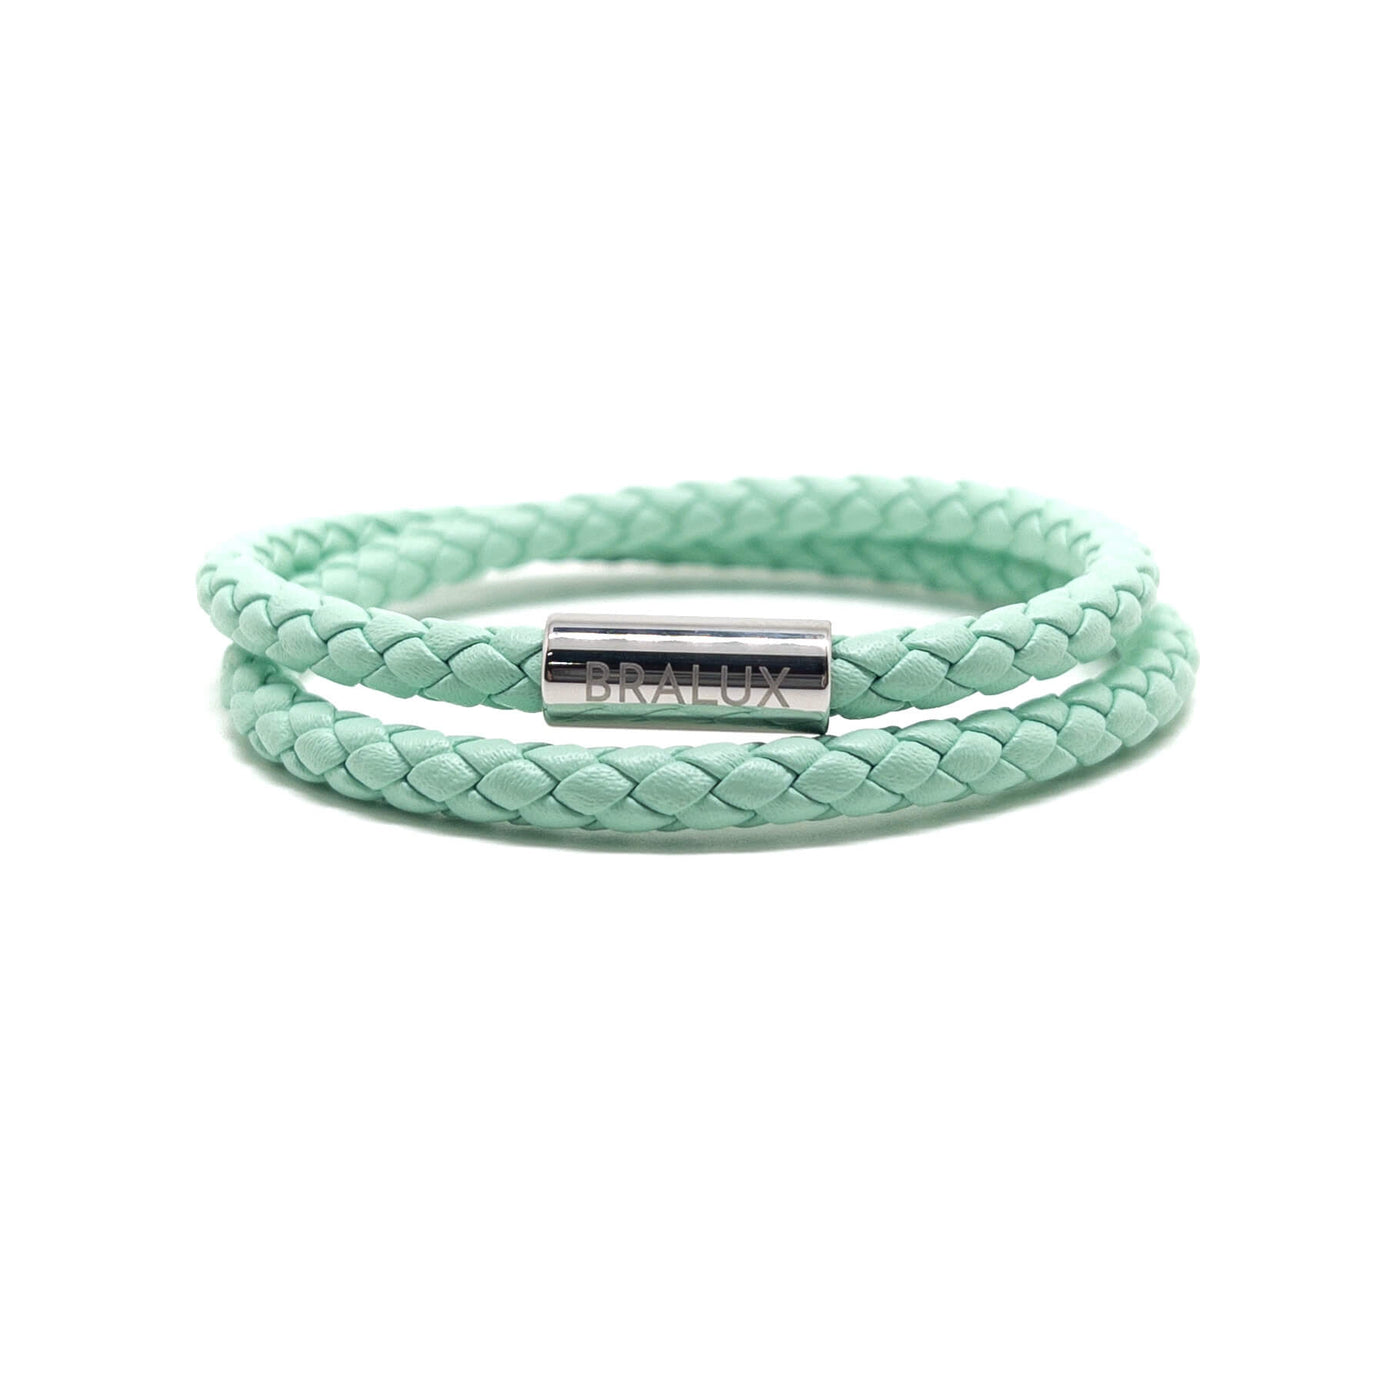 The Duo Light Green Leather Bracelet